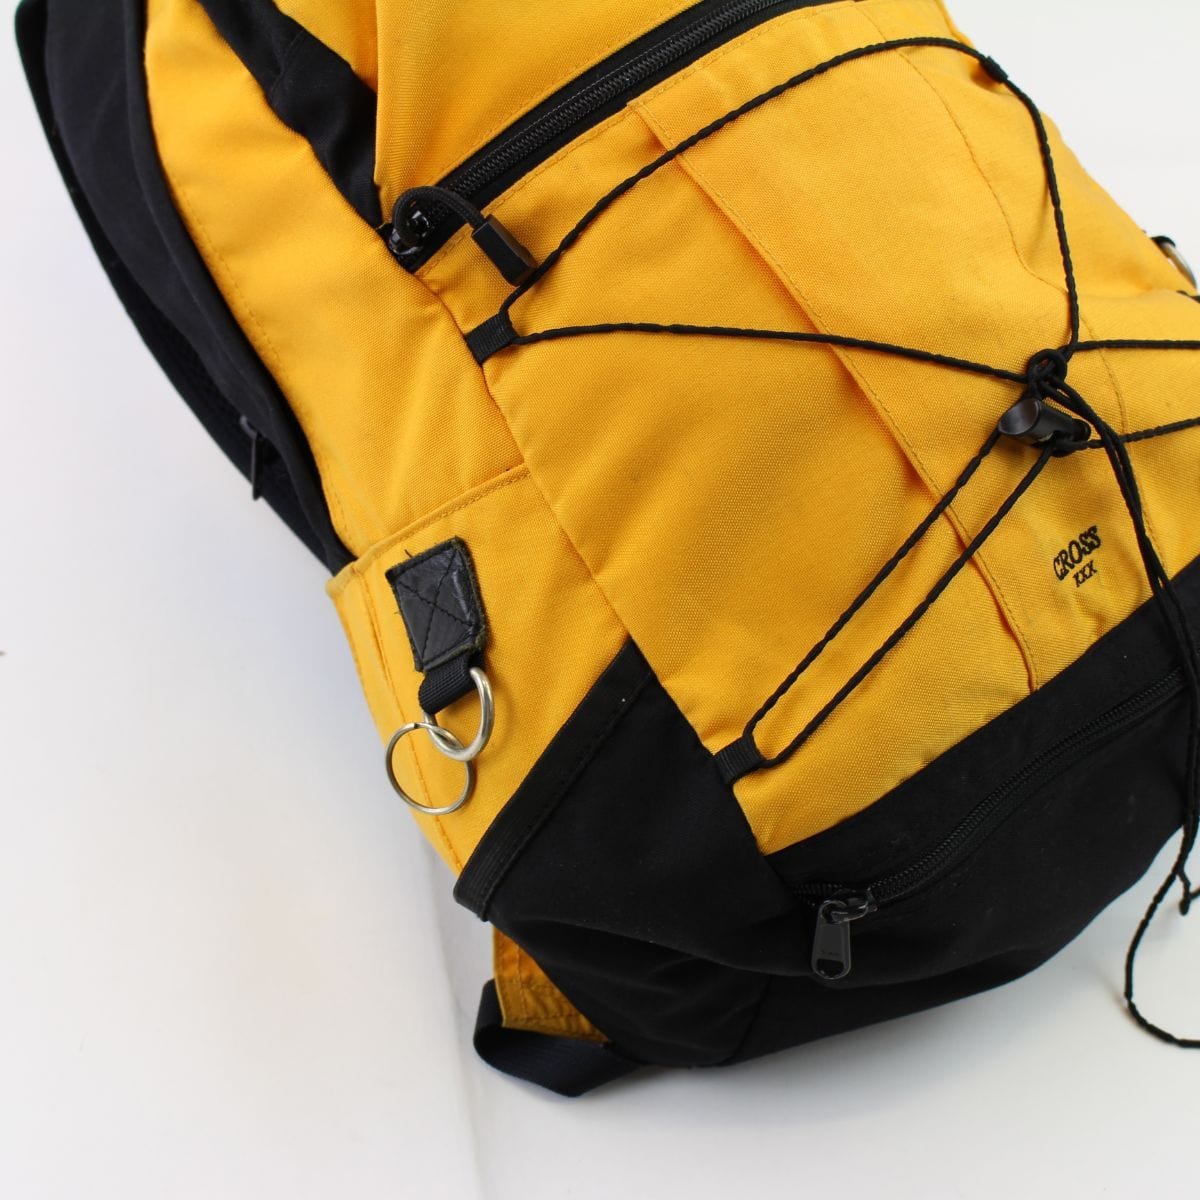 Supreme Cross XXX Yellow Backpack 2011 - SaruGeneral